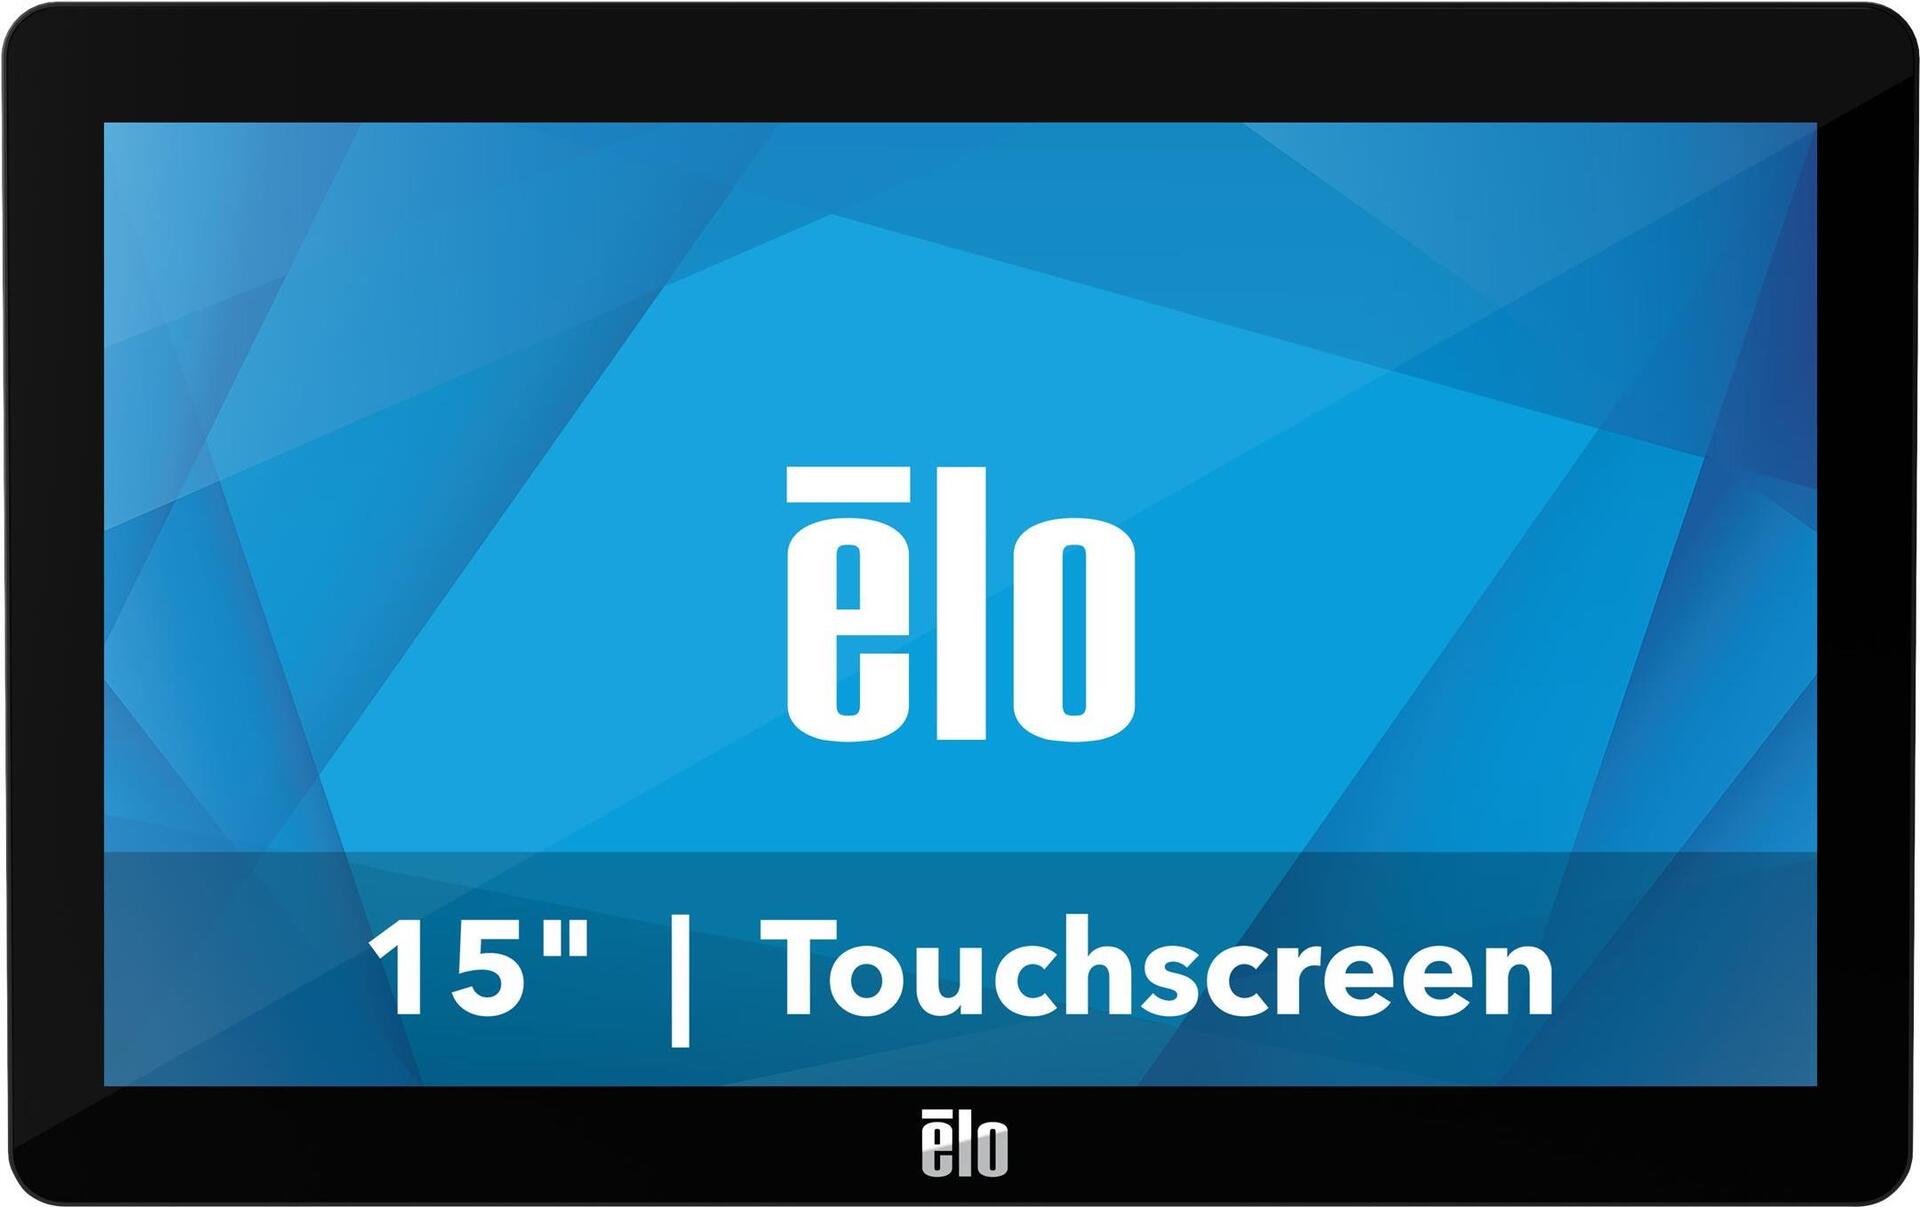 ELO 1502LM 15.6" wide LCD Medical Grade Monitor, Full HD, Projected Capacitive 10-touch, USB Controller, Anti-glare, Zero-bezel, No stand, USB-C, HDMI and VGA Inputs, Black, Worldwide (E967064)